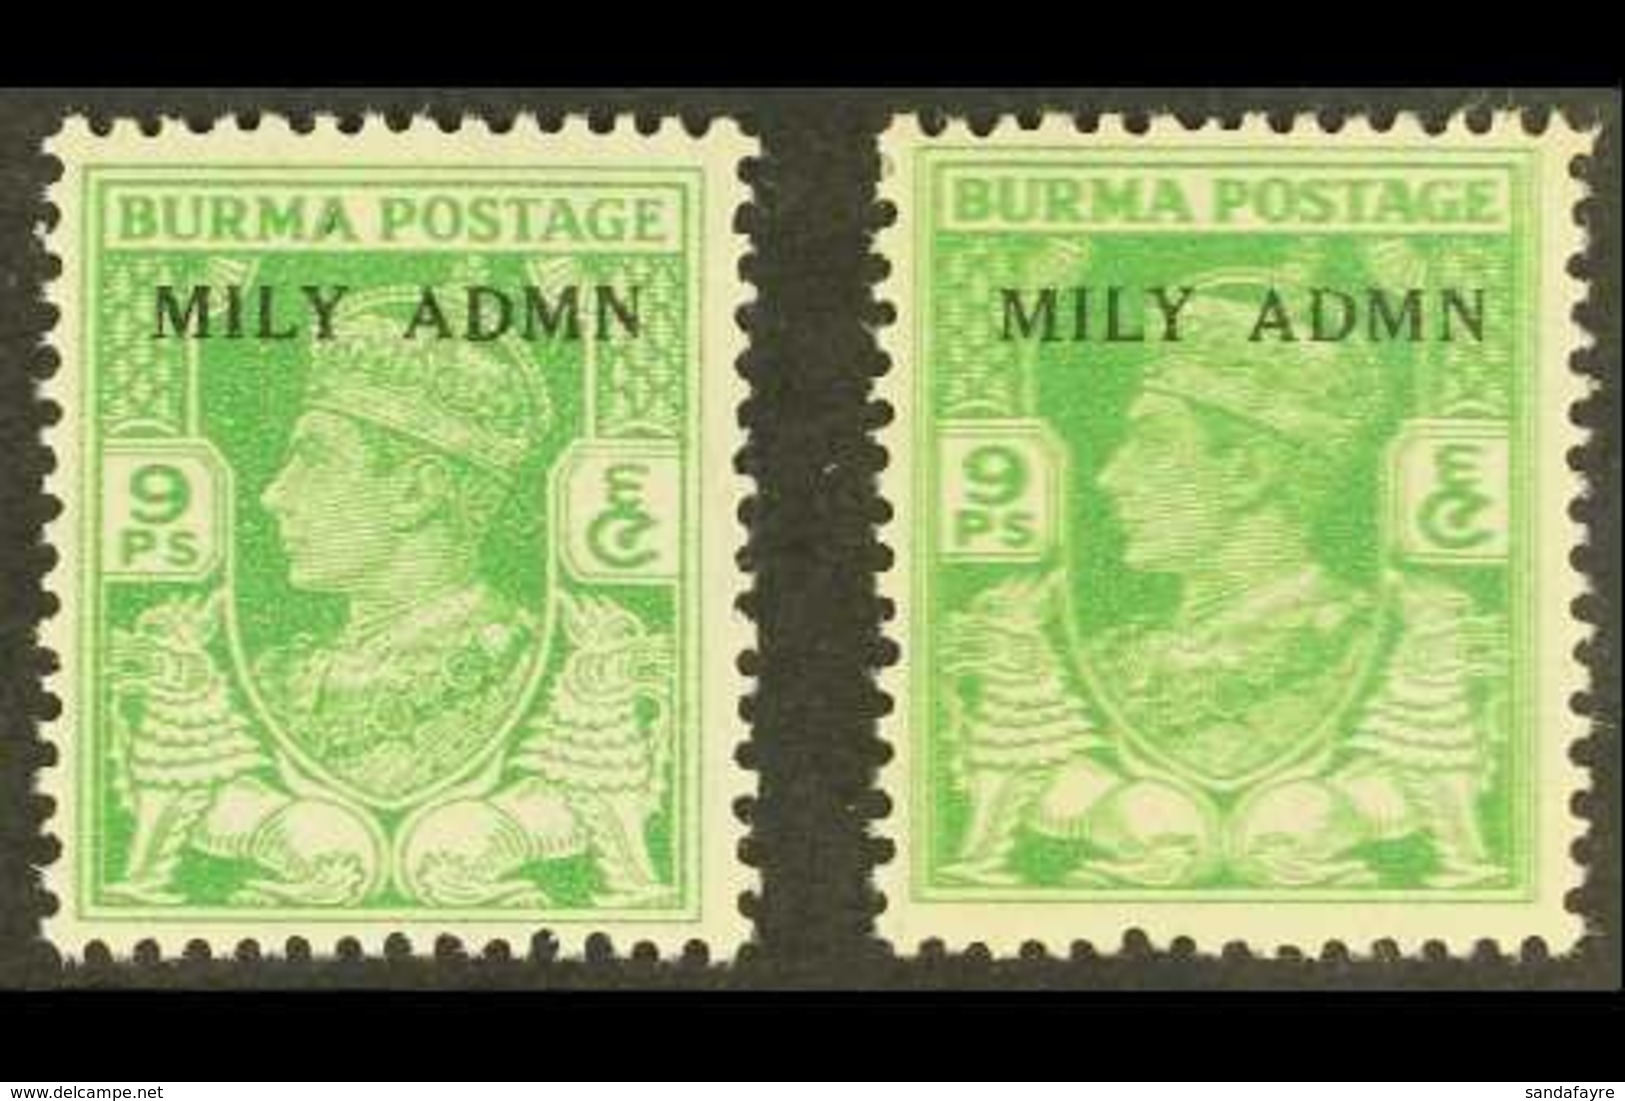 1945 9p Yellow- Green "Mily Admn" With STAMP PRINTED DOUBLE, SG 38 Variety, Never Hinged Mint, With A Normal For Compari - Birmania (...-1947)